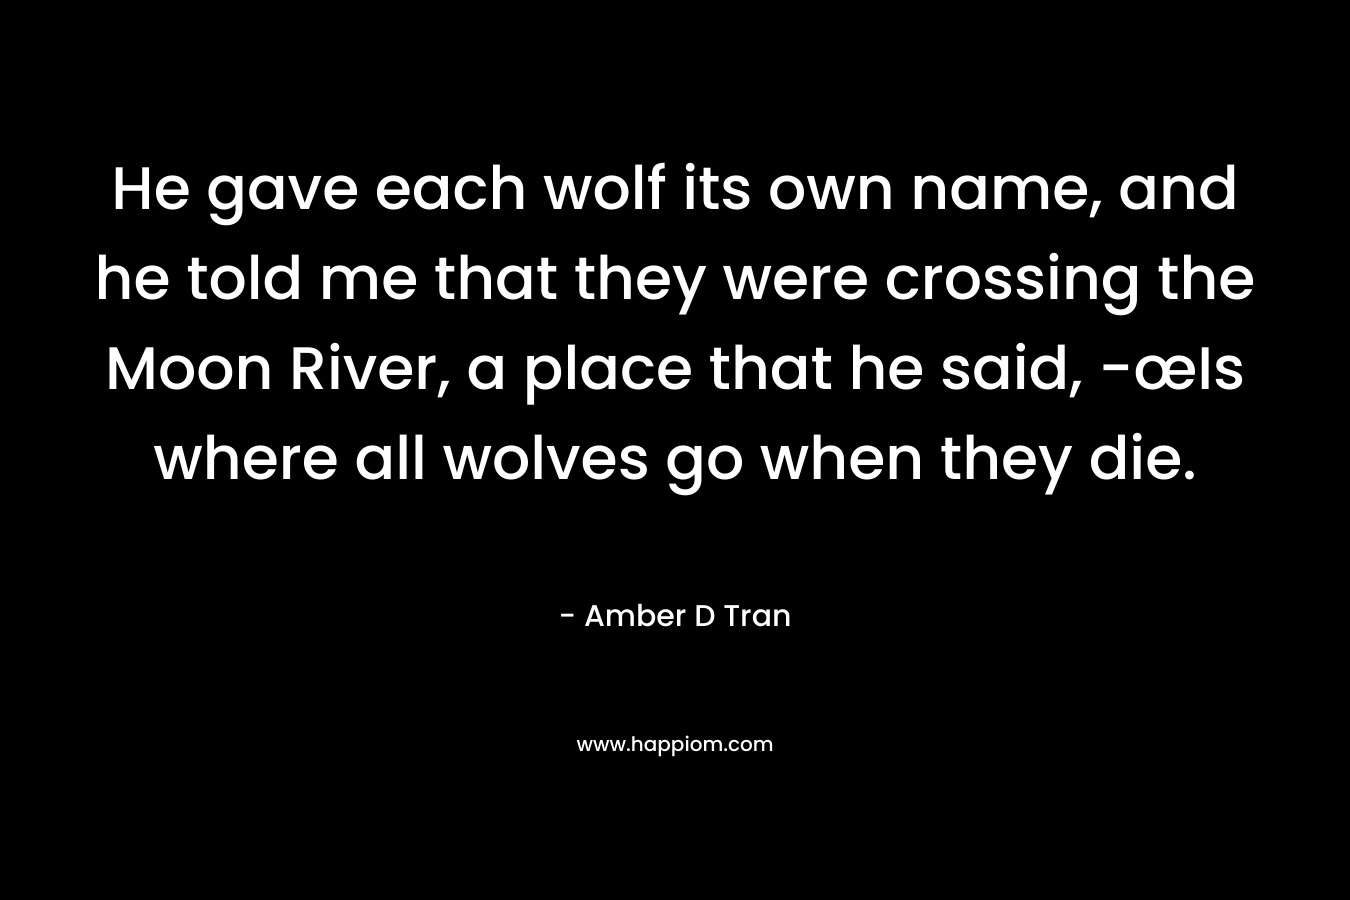 He gave each wolf its own name, and he told me that they were crossing the Moon River, a place that he said, -œIs where all wolves go when they die. – Amber D Tran